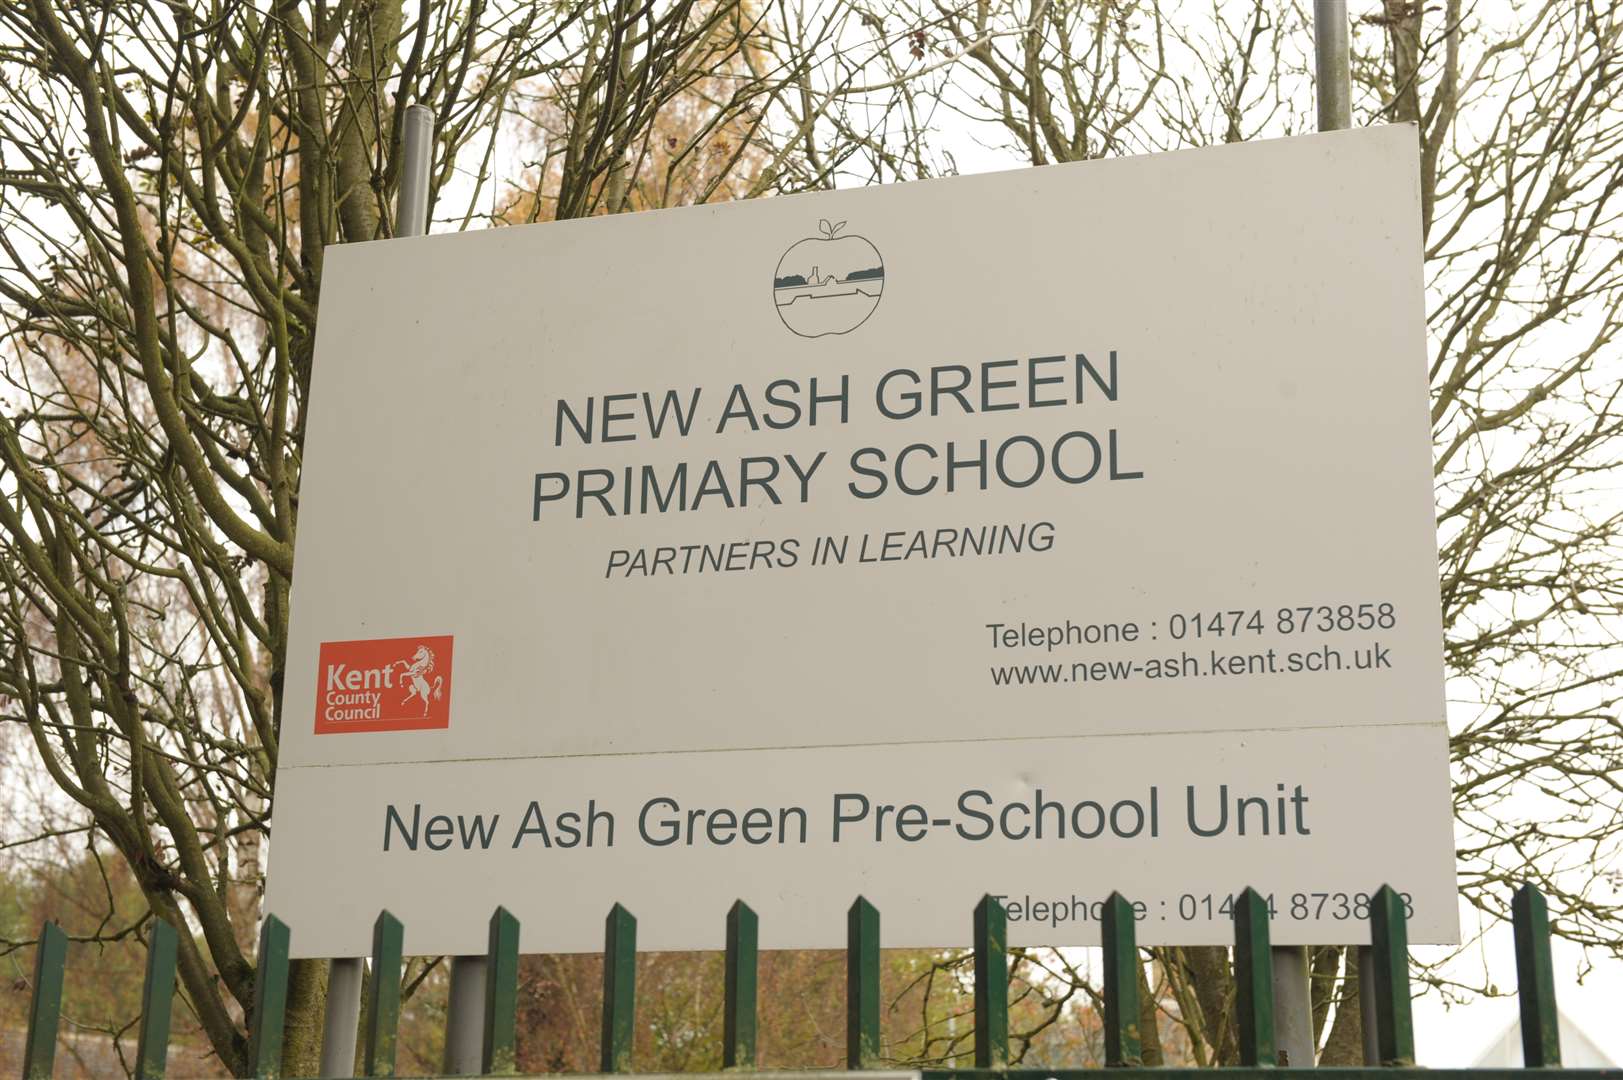 New Ash Green Primary